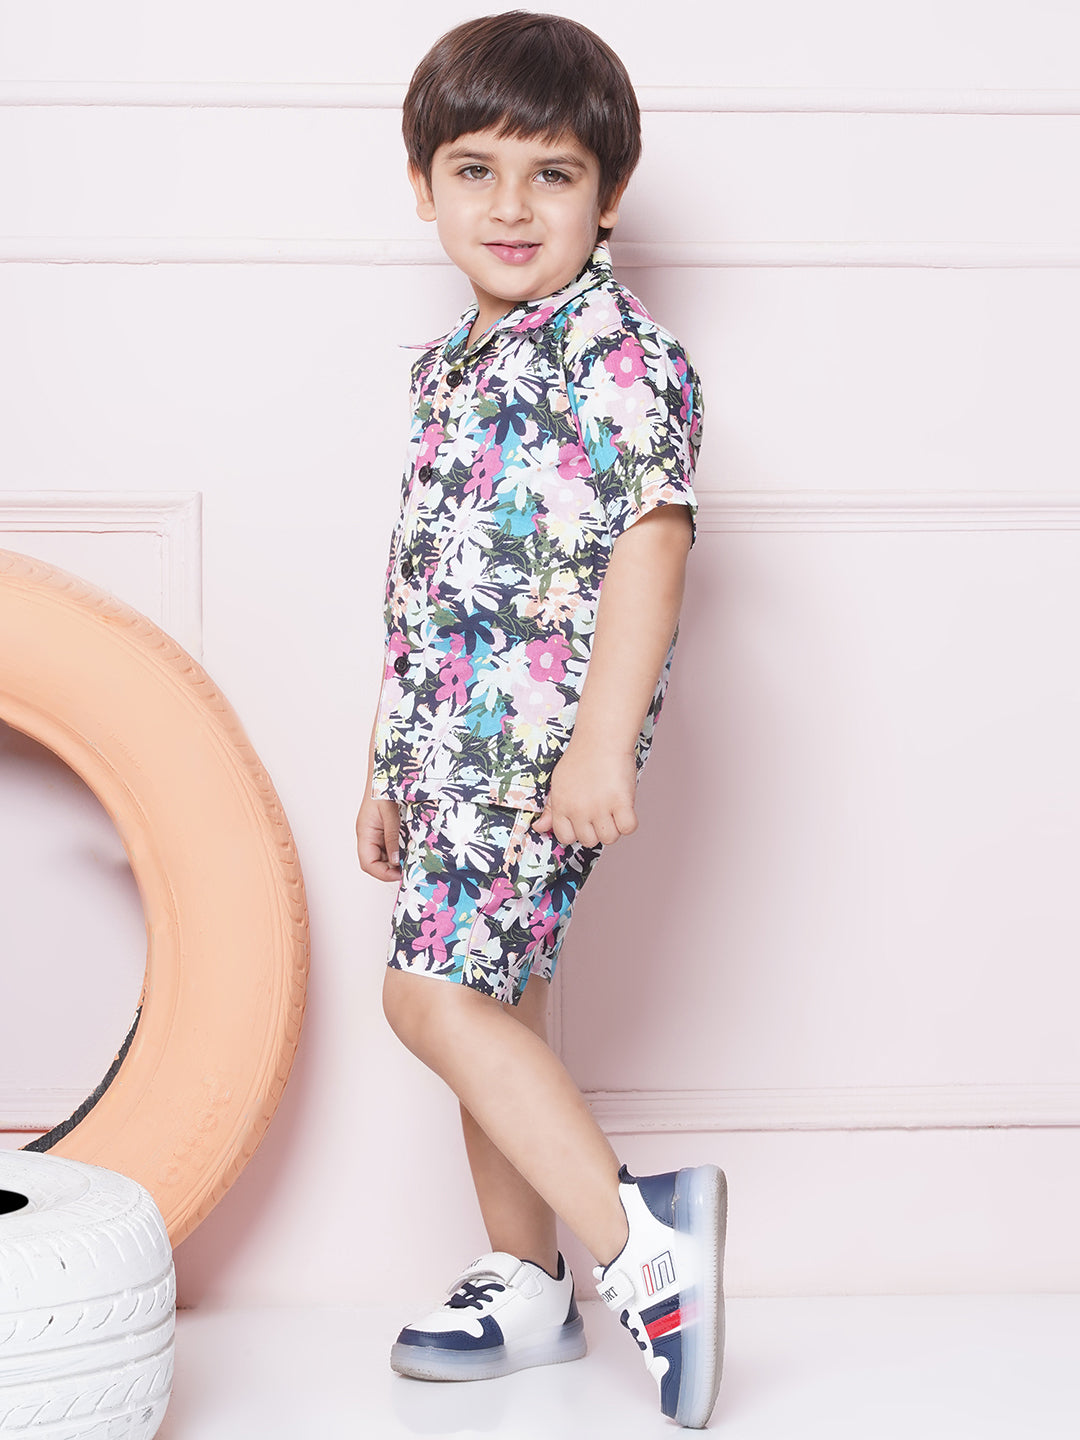 Multi-Color Cotton Shirt & shorts Half Sleeves with Collar and Floral CO-ORDS Set for Boys